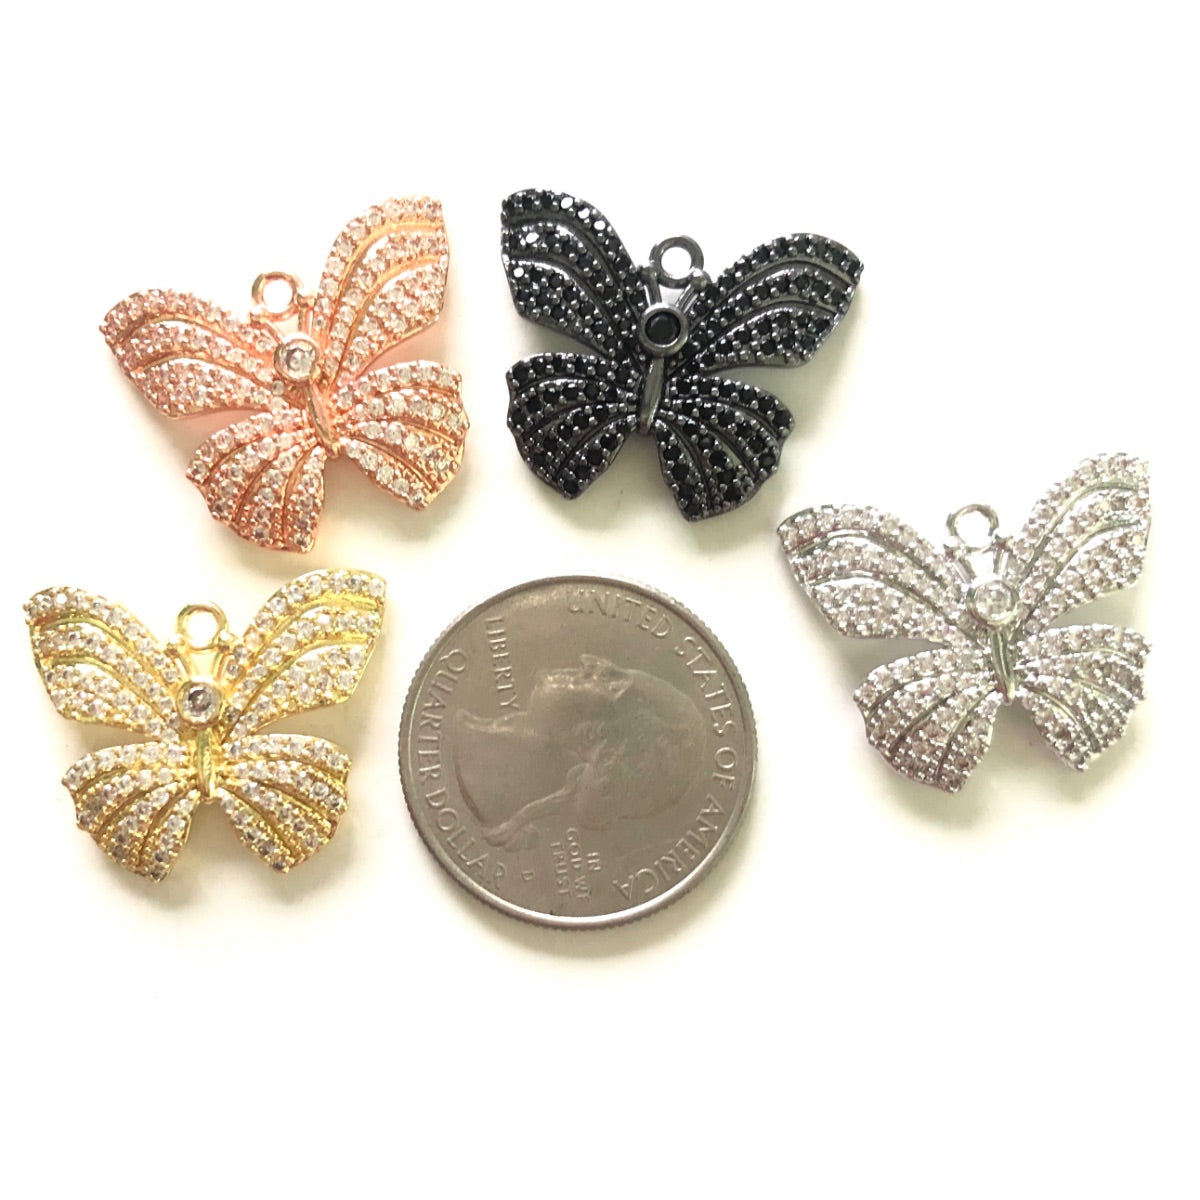 10pcs/lot 24.8*20.4mm CZ Paved Butterfly Charms CZ Paved Charms Butterflies Charms Beads Beyond